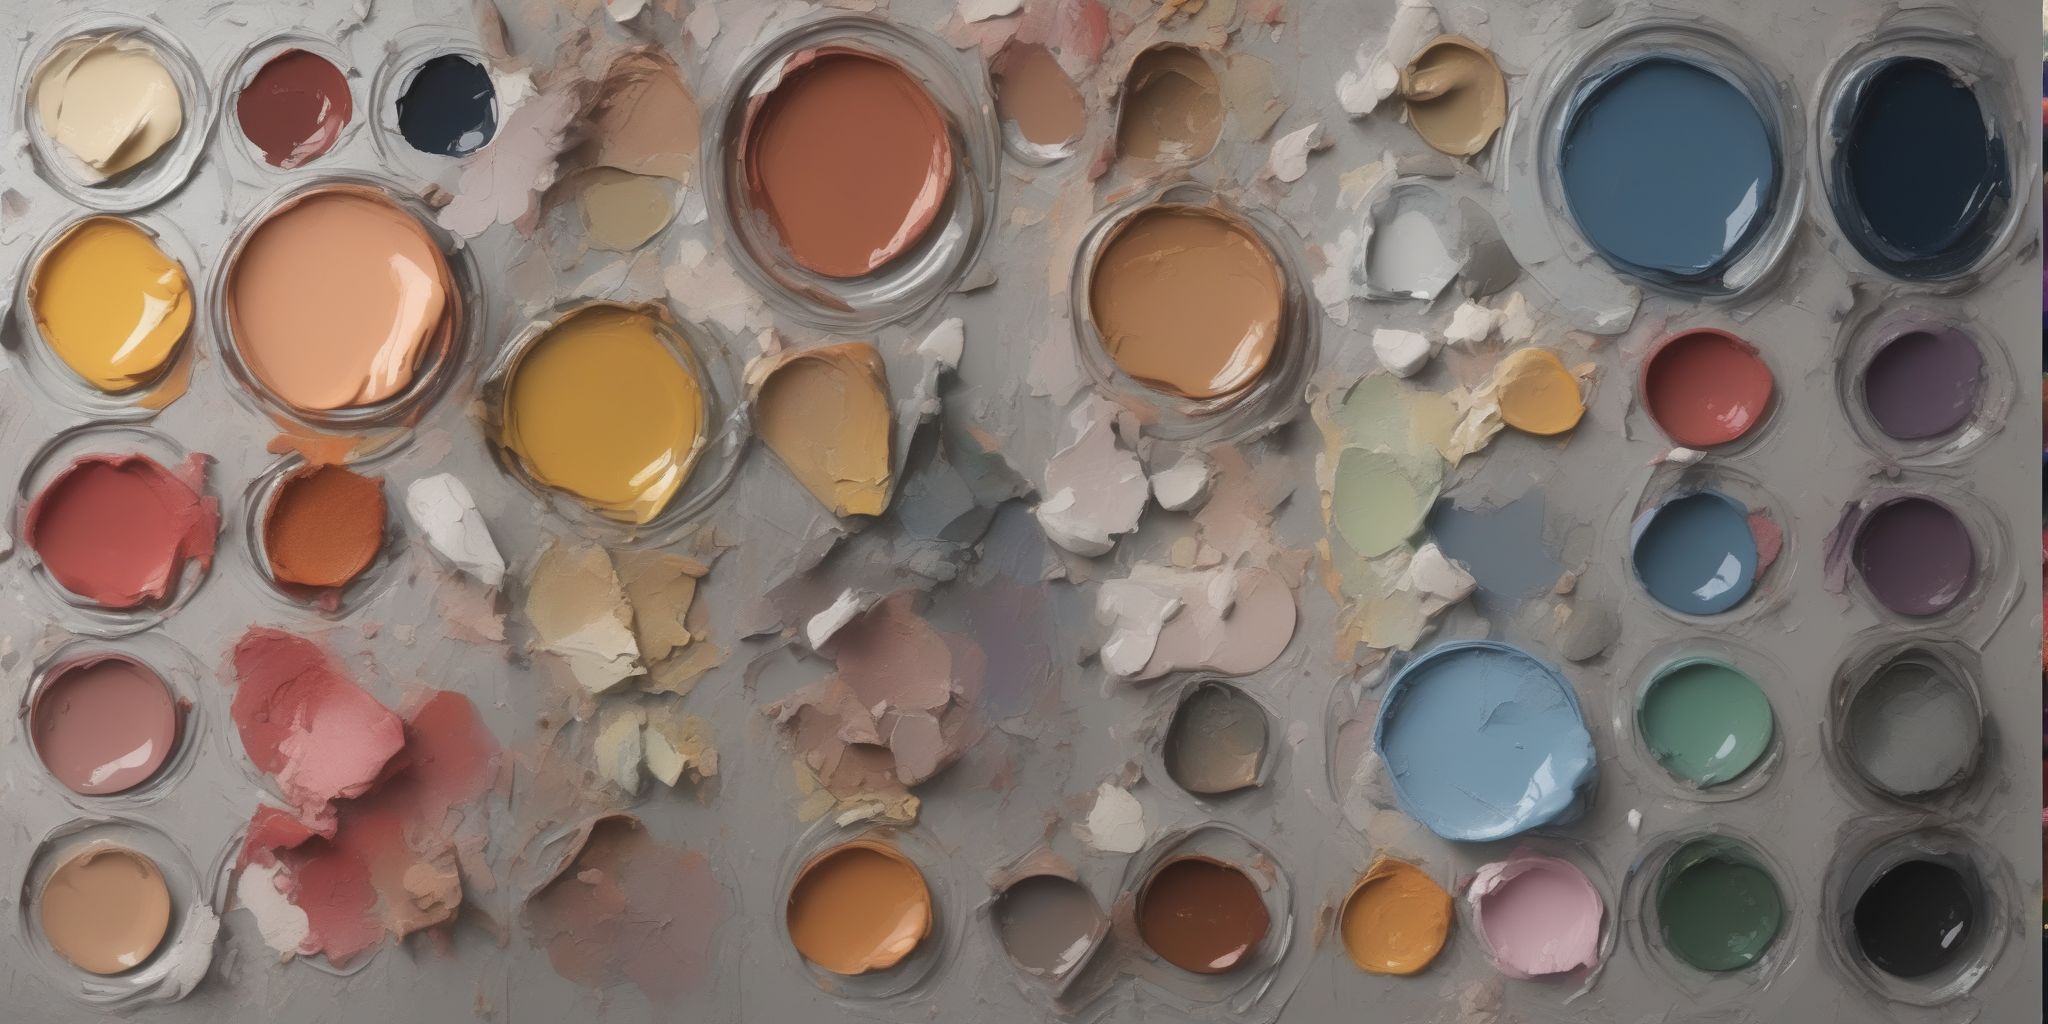 Palette  in realistic, photographic style